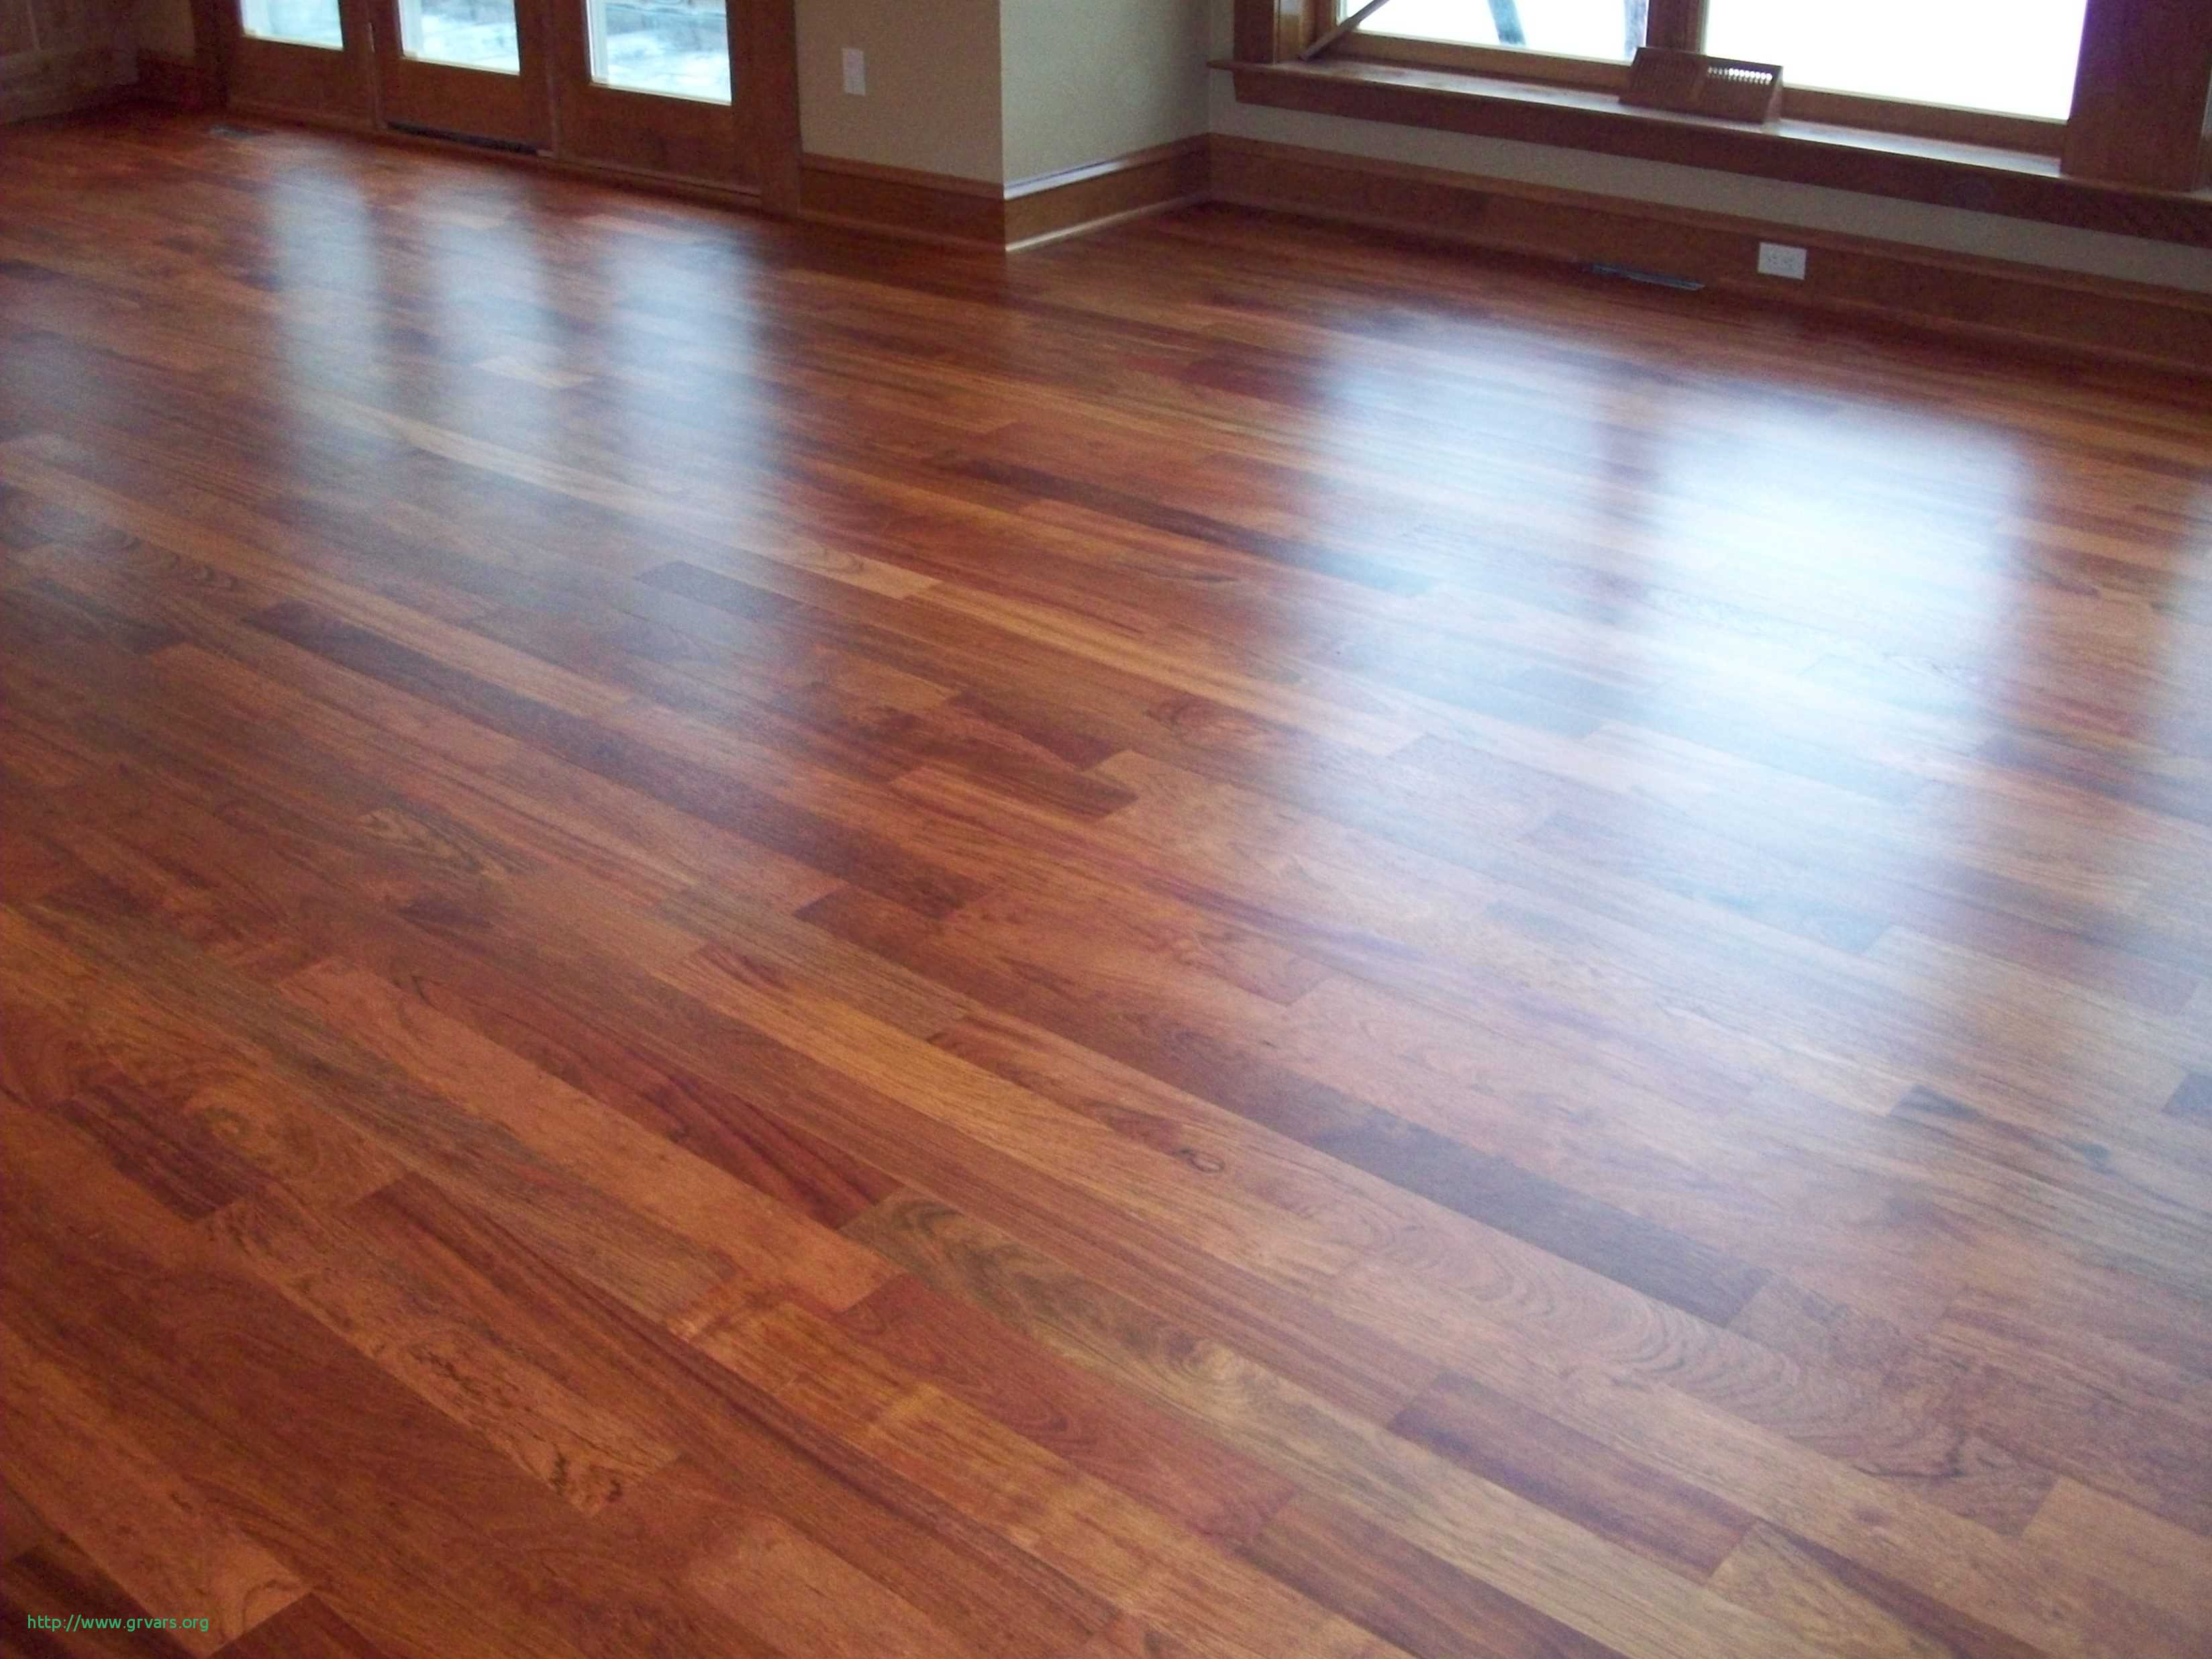 27 Famous Laminate Wood Flooring Vs Hardwood Cost 2024 free download laminate wood flooring vs hardwood cost of 21 inspirant best prices for laminate wood flooring ideas blog regarding best prices for laminate wood flooring impressionnant engaging discount ha